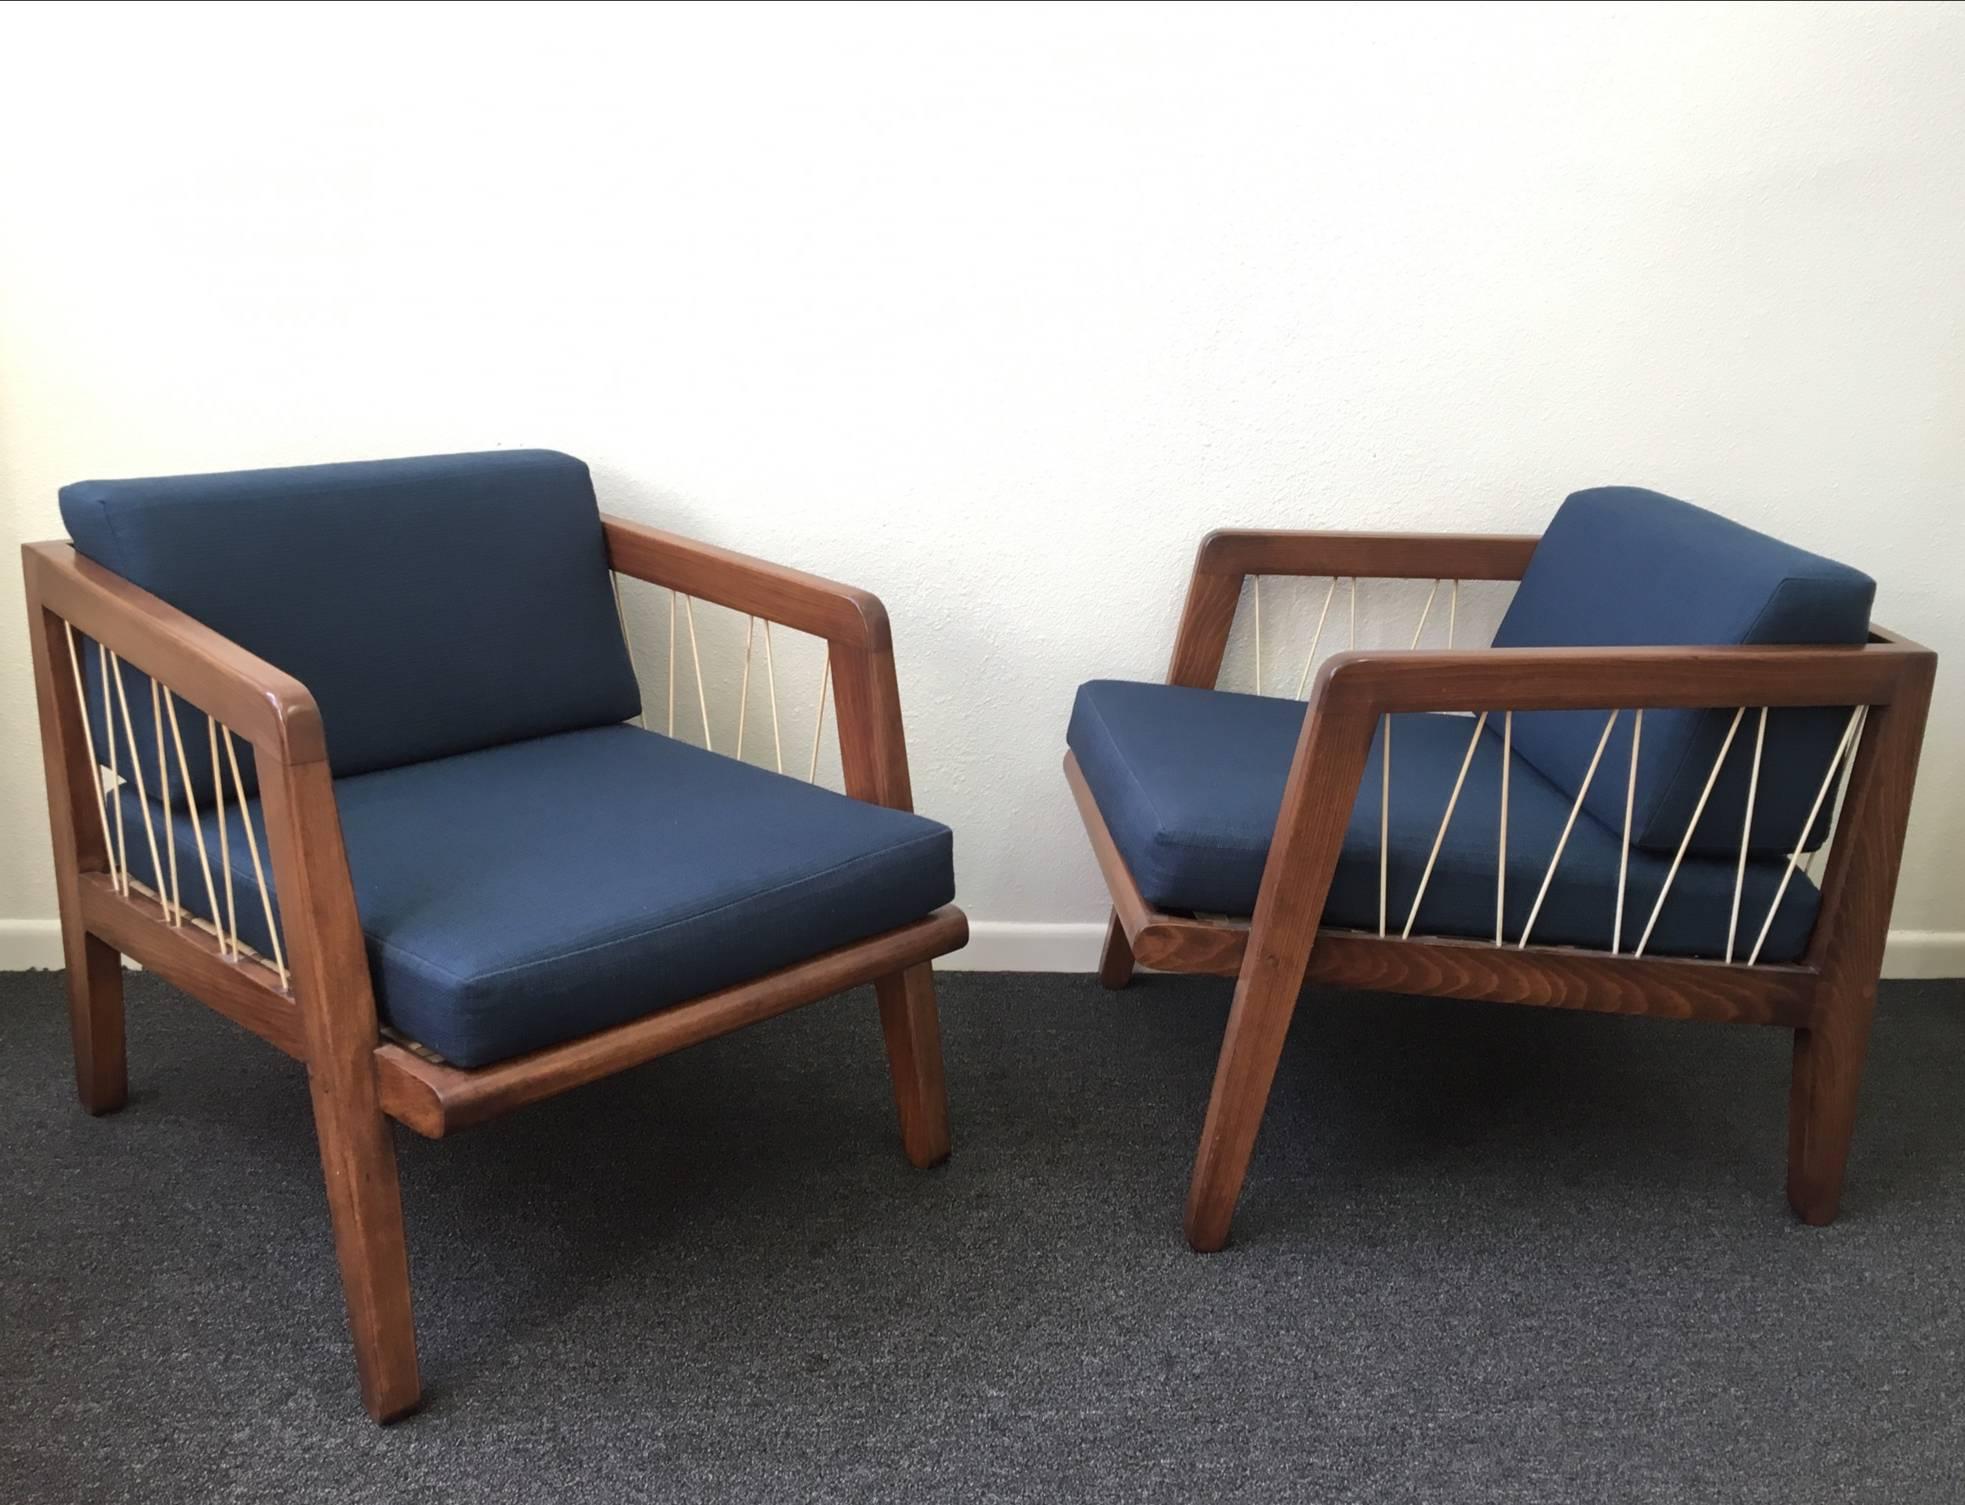 Fabric Pair of Lounge Chairs by Edward Wormley for Drexel